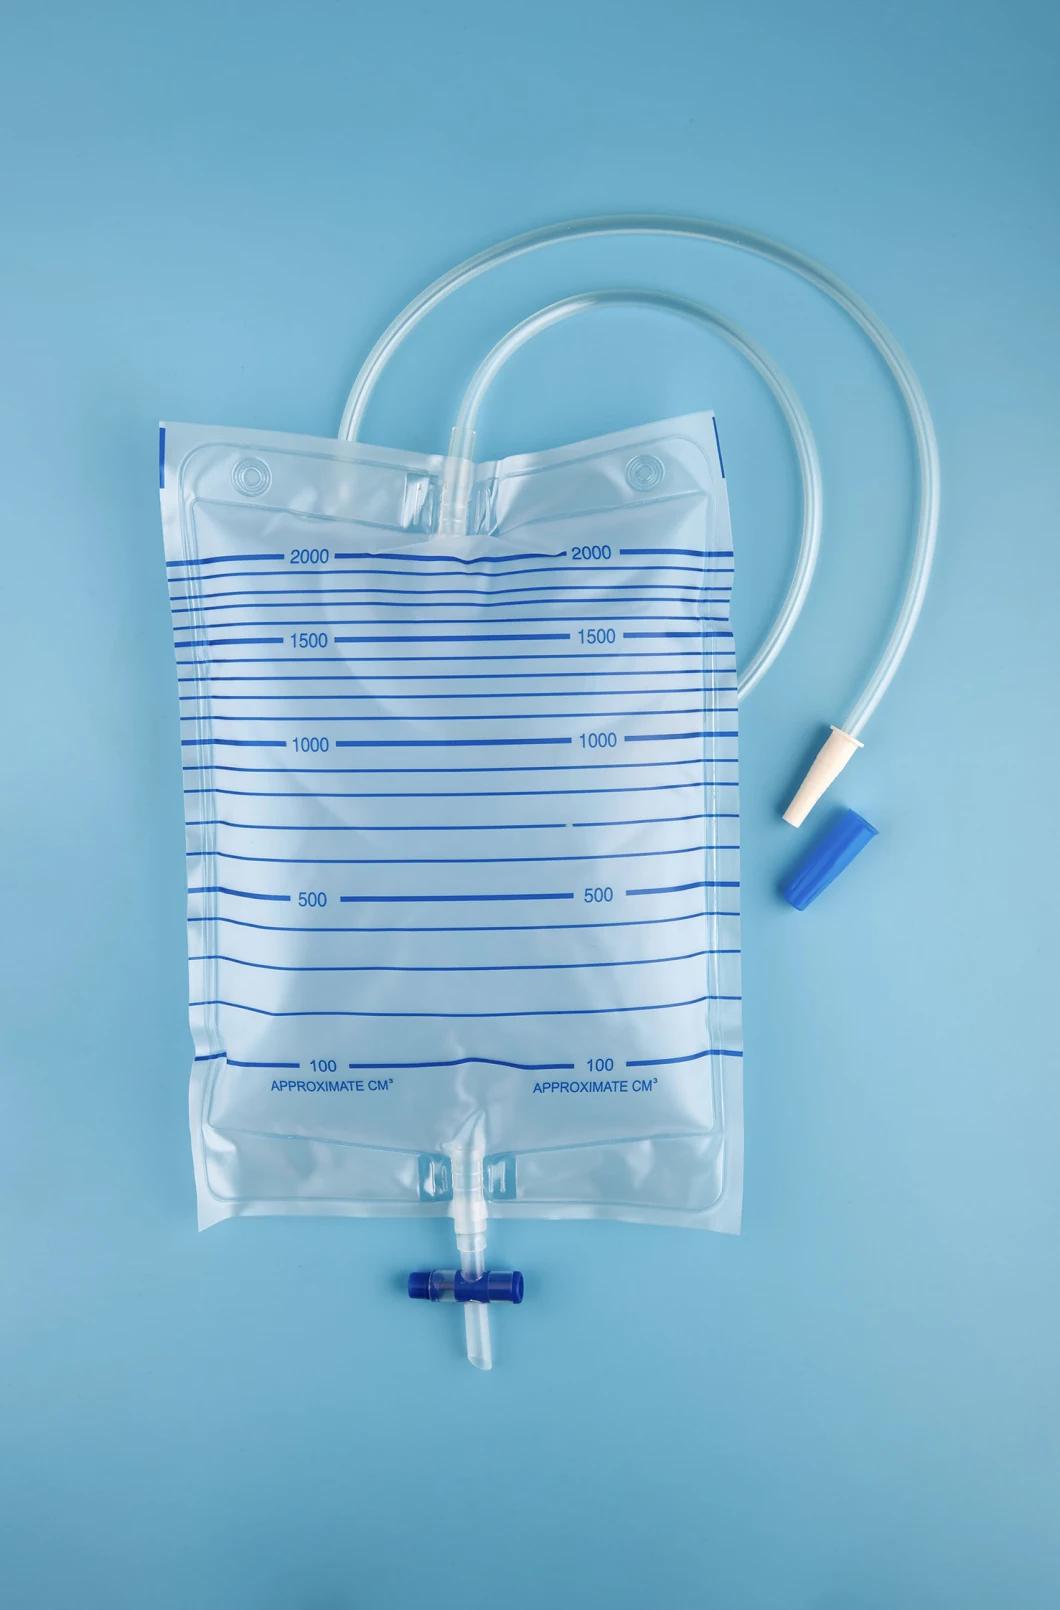 Wholesale Disposable Urine Bag with Anti Reflux Valve